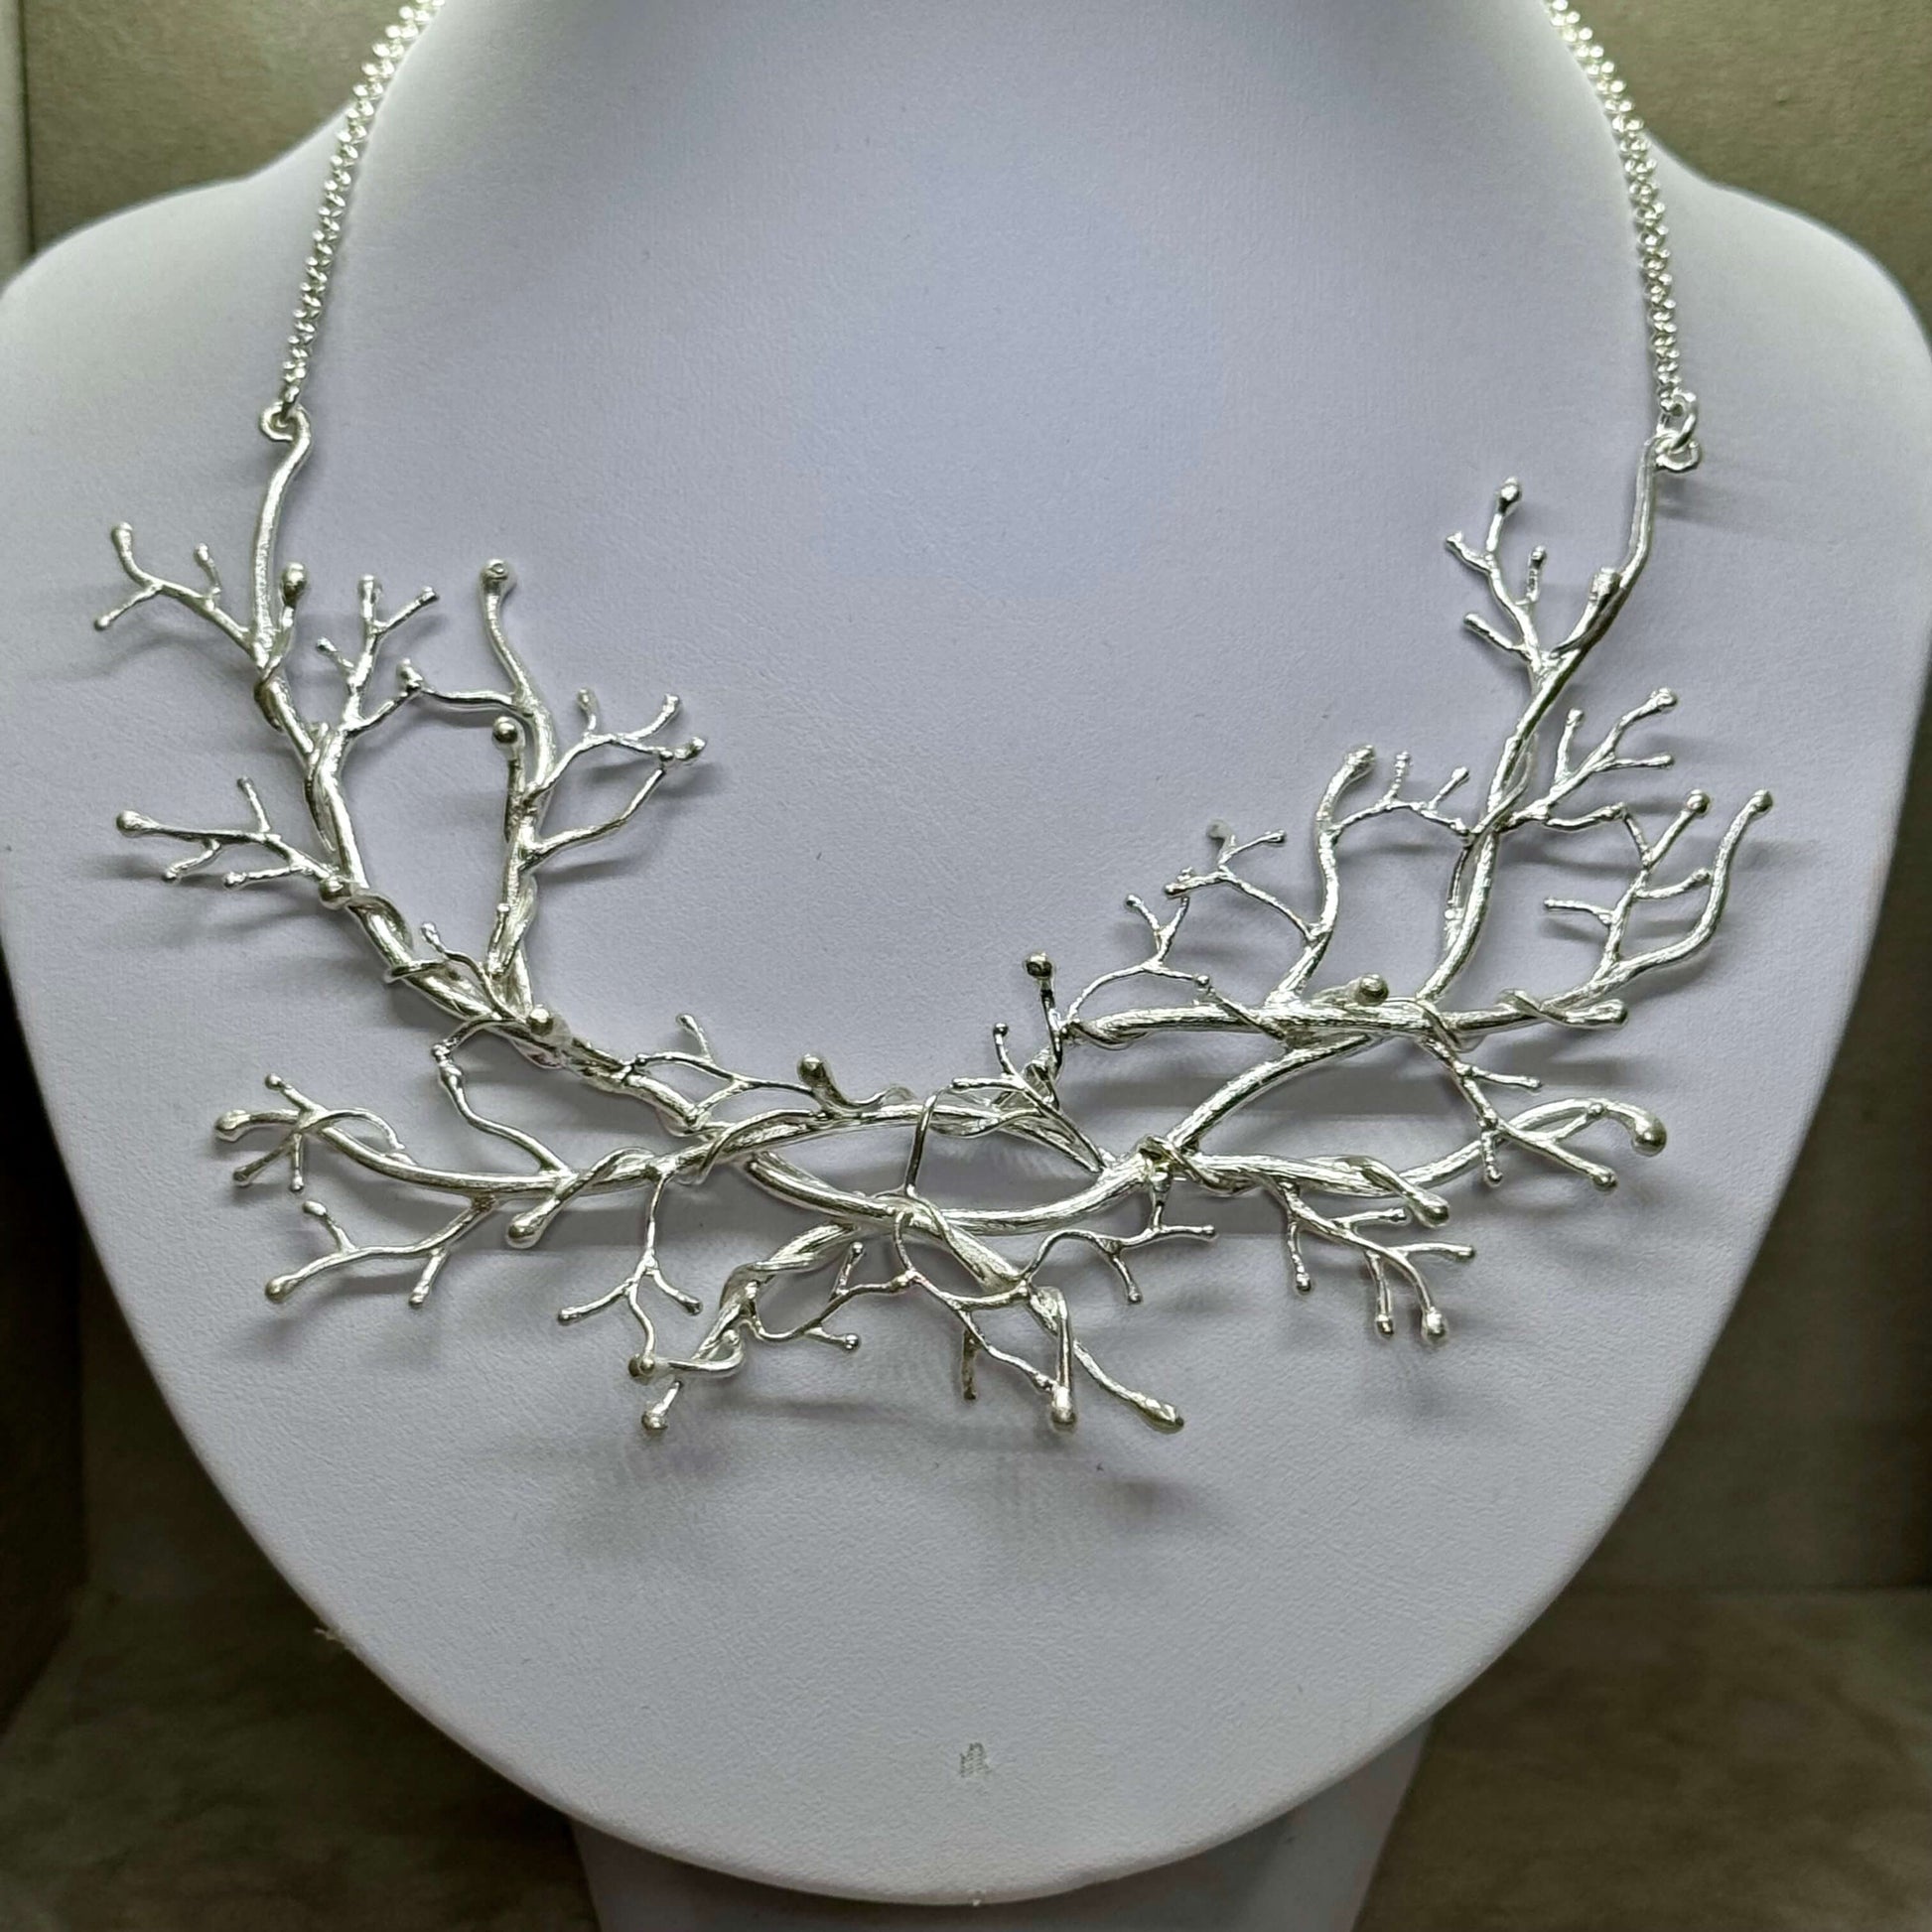 Majestic Tree Branch Sterling Silver Statement Artisan Necklace - Twelve Silver Trees